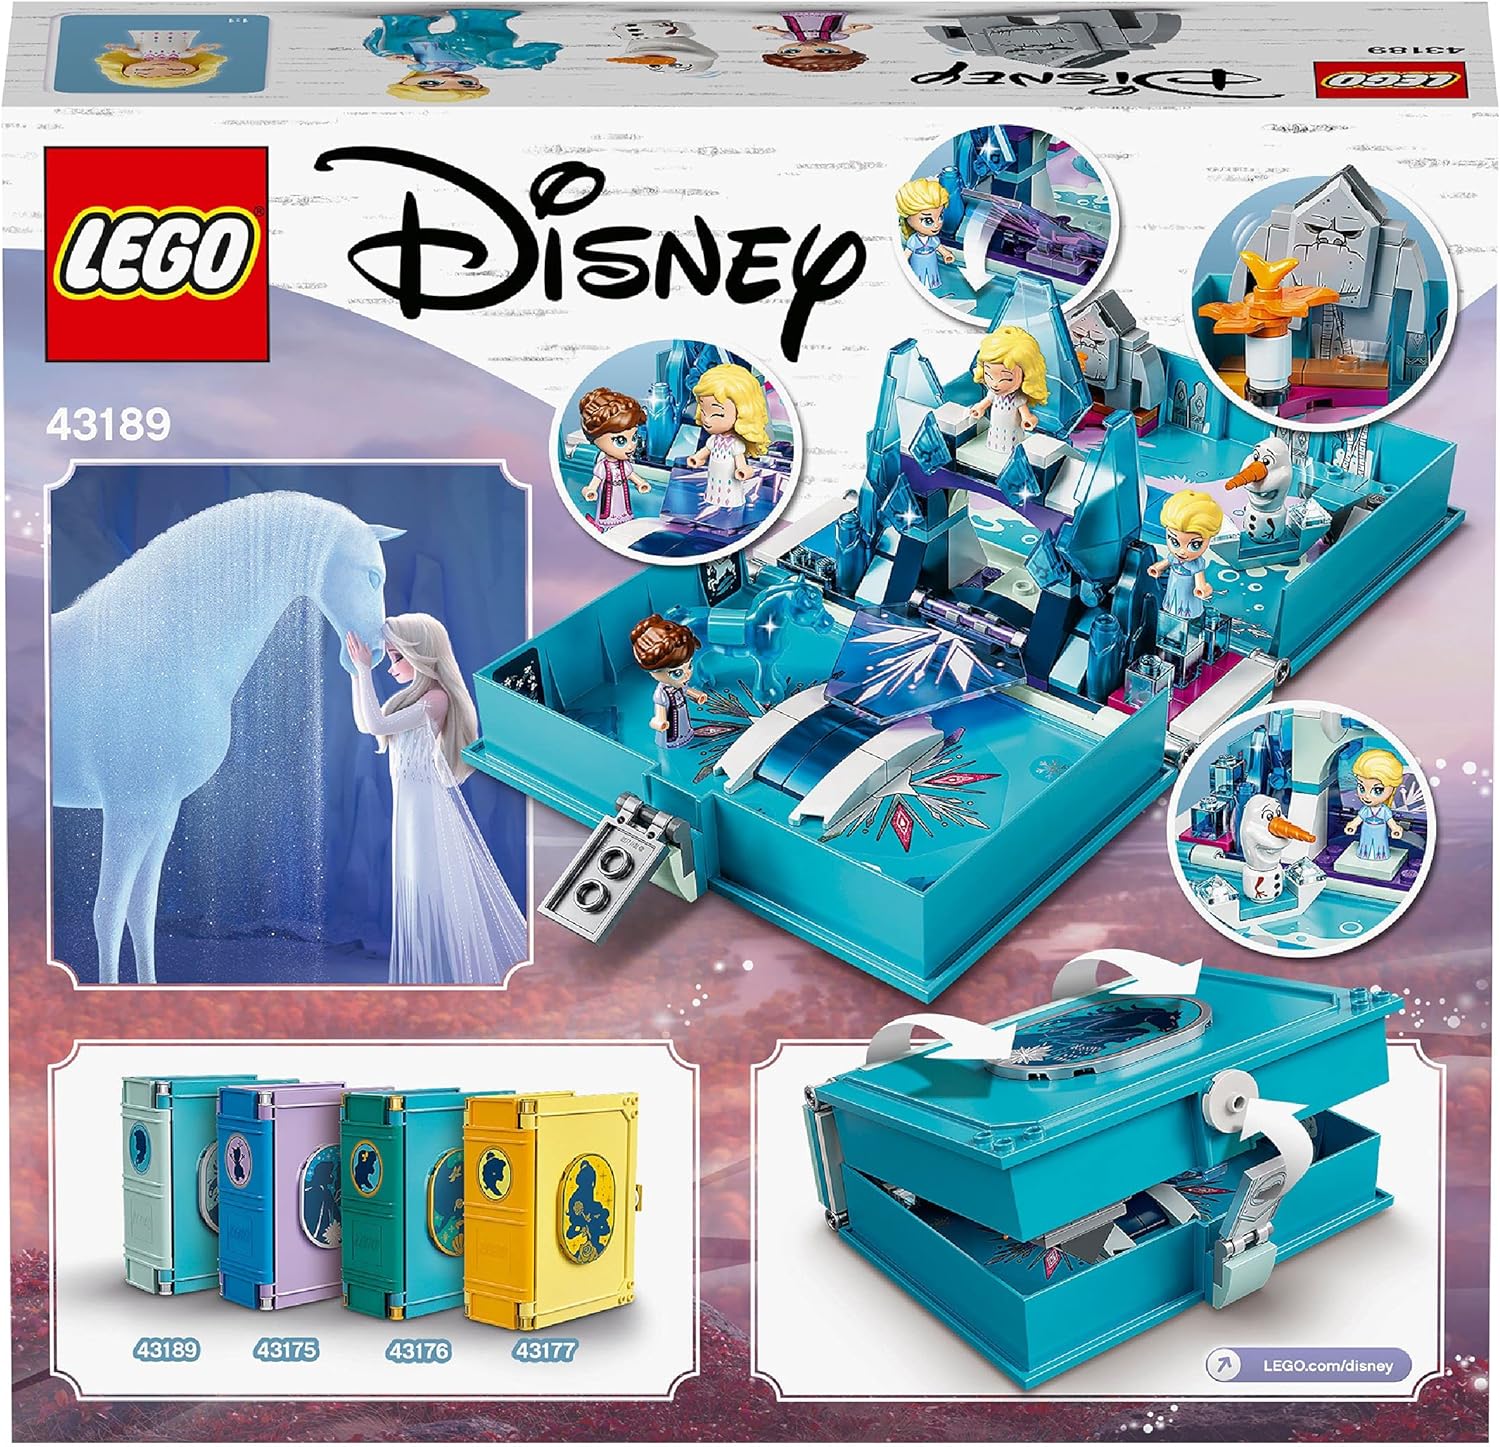 LEGO 43189 Disney Princess Frozen 2 Elsa\'s Storybook, Portable Play Set, Travel Toy for Kids, The Ice Queen 2